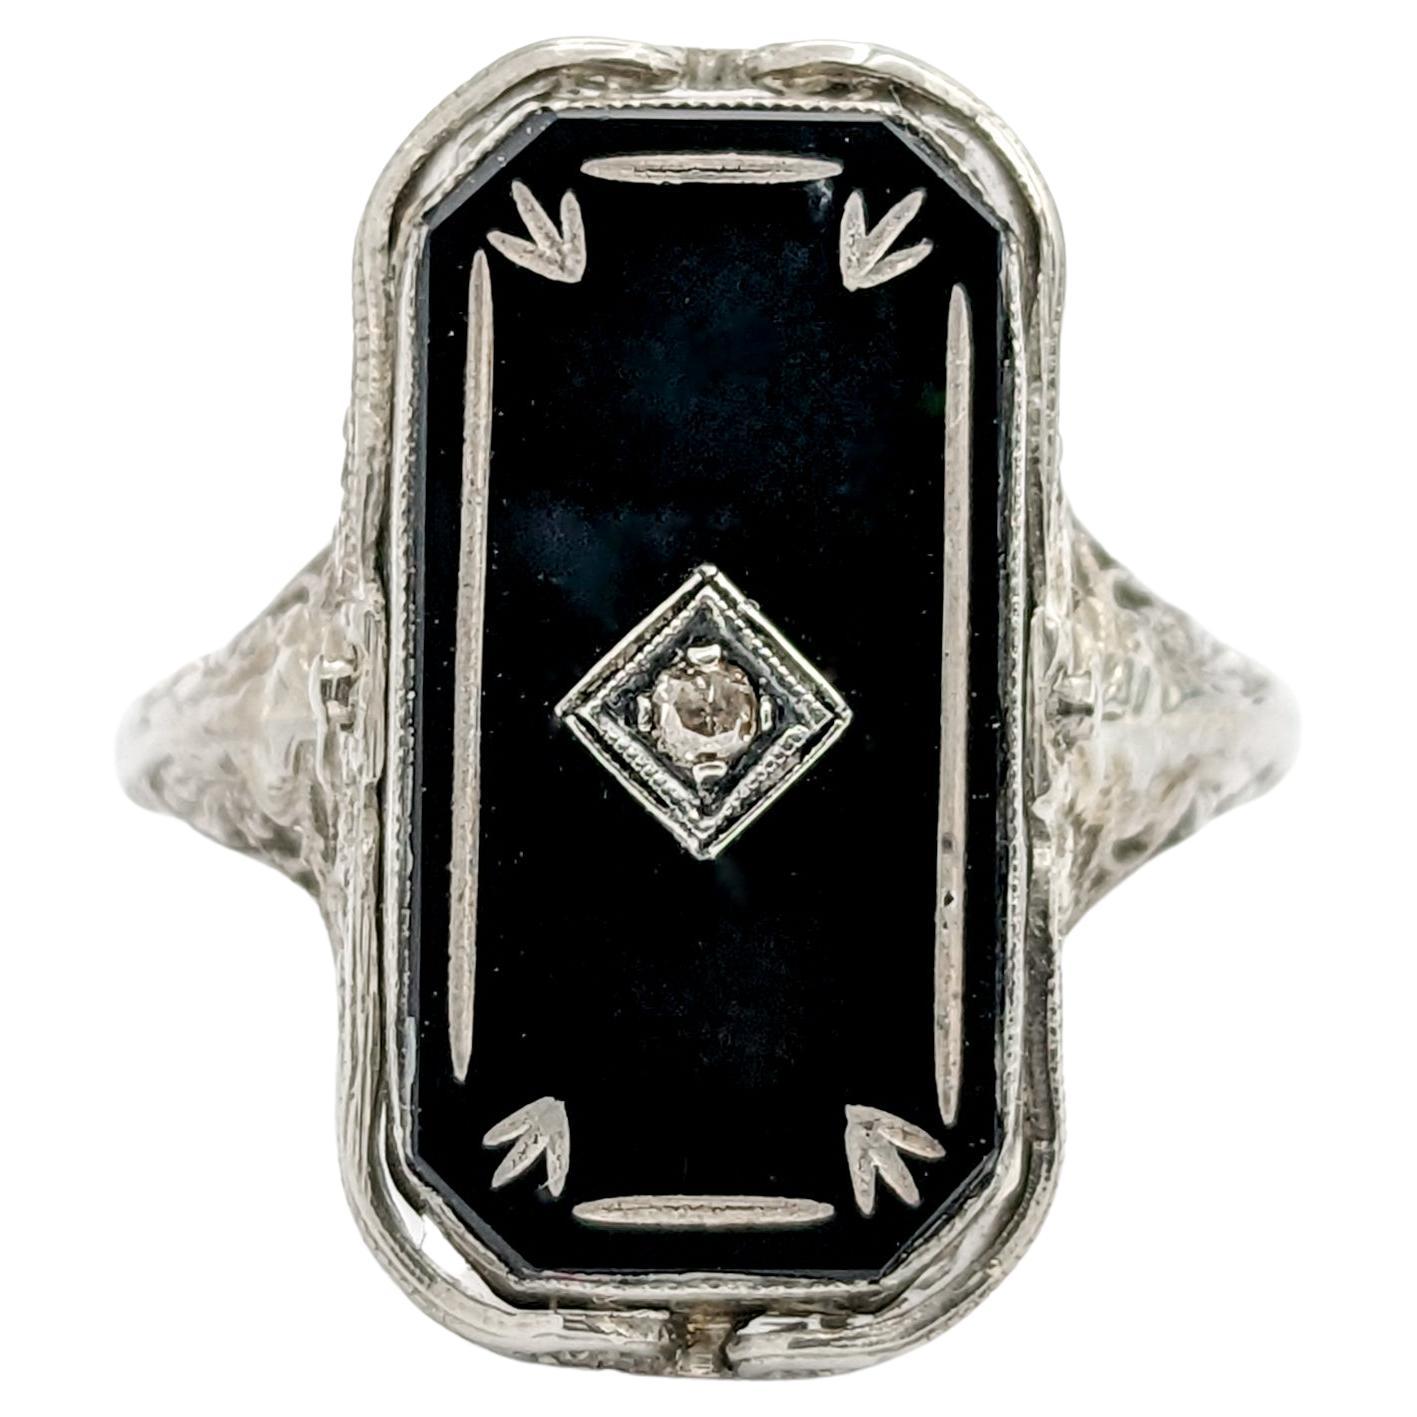 Antique Cameo Habille Diamond & Onyx Flip Ring In White Gold